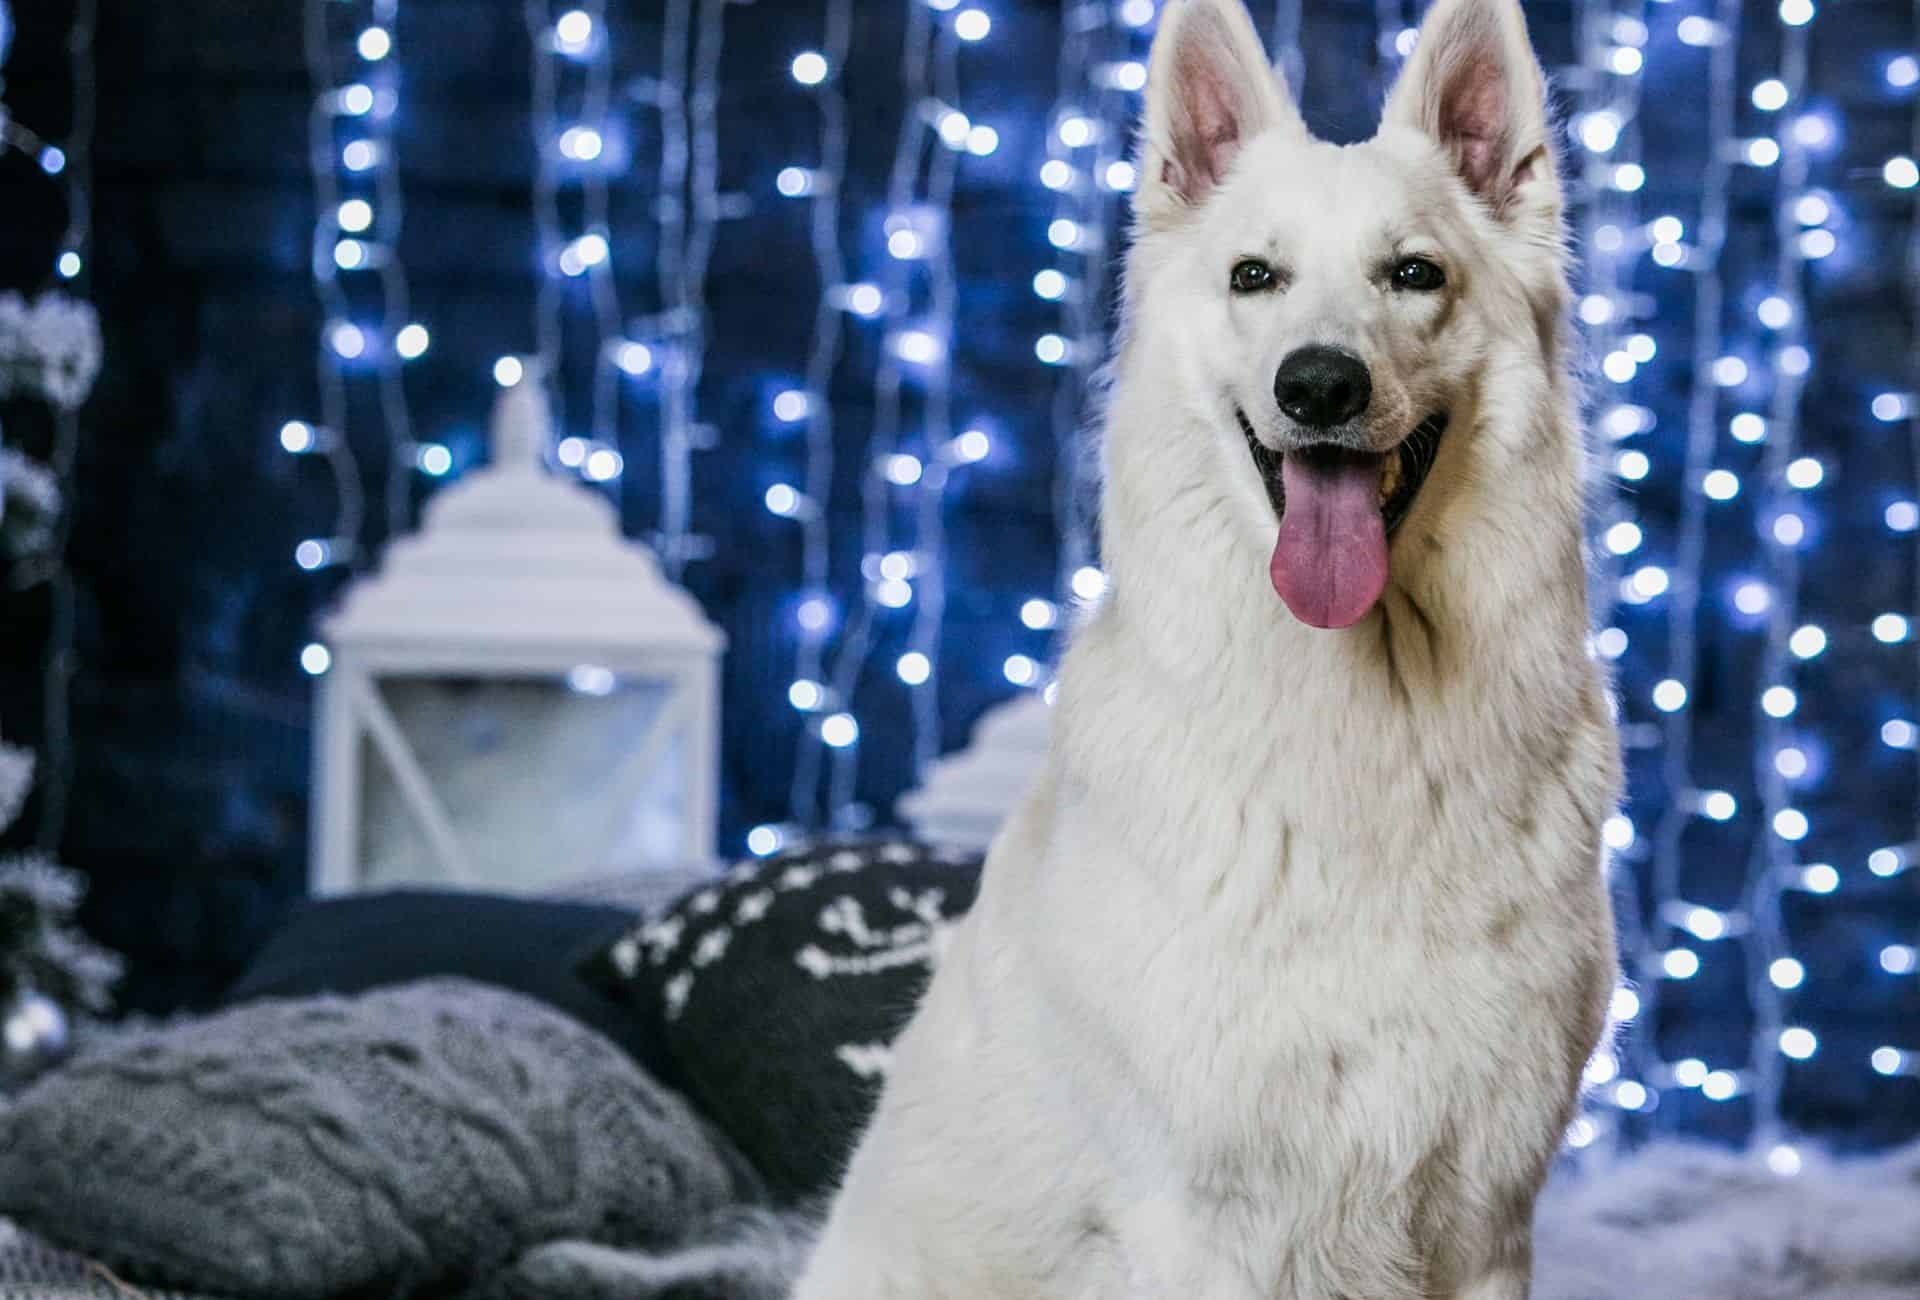 White Swiss German Shepherd standing in a room illuminated by a string of blue lights.